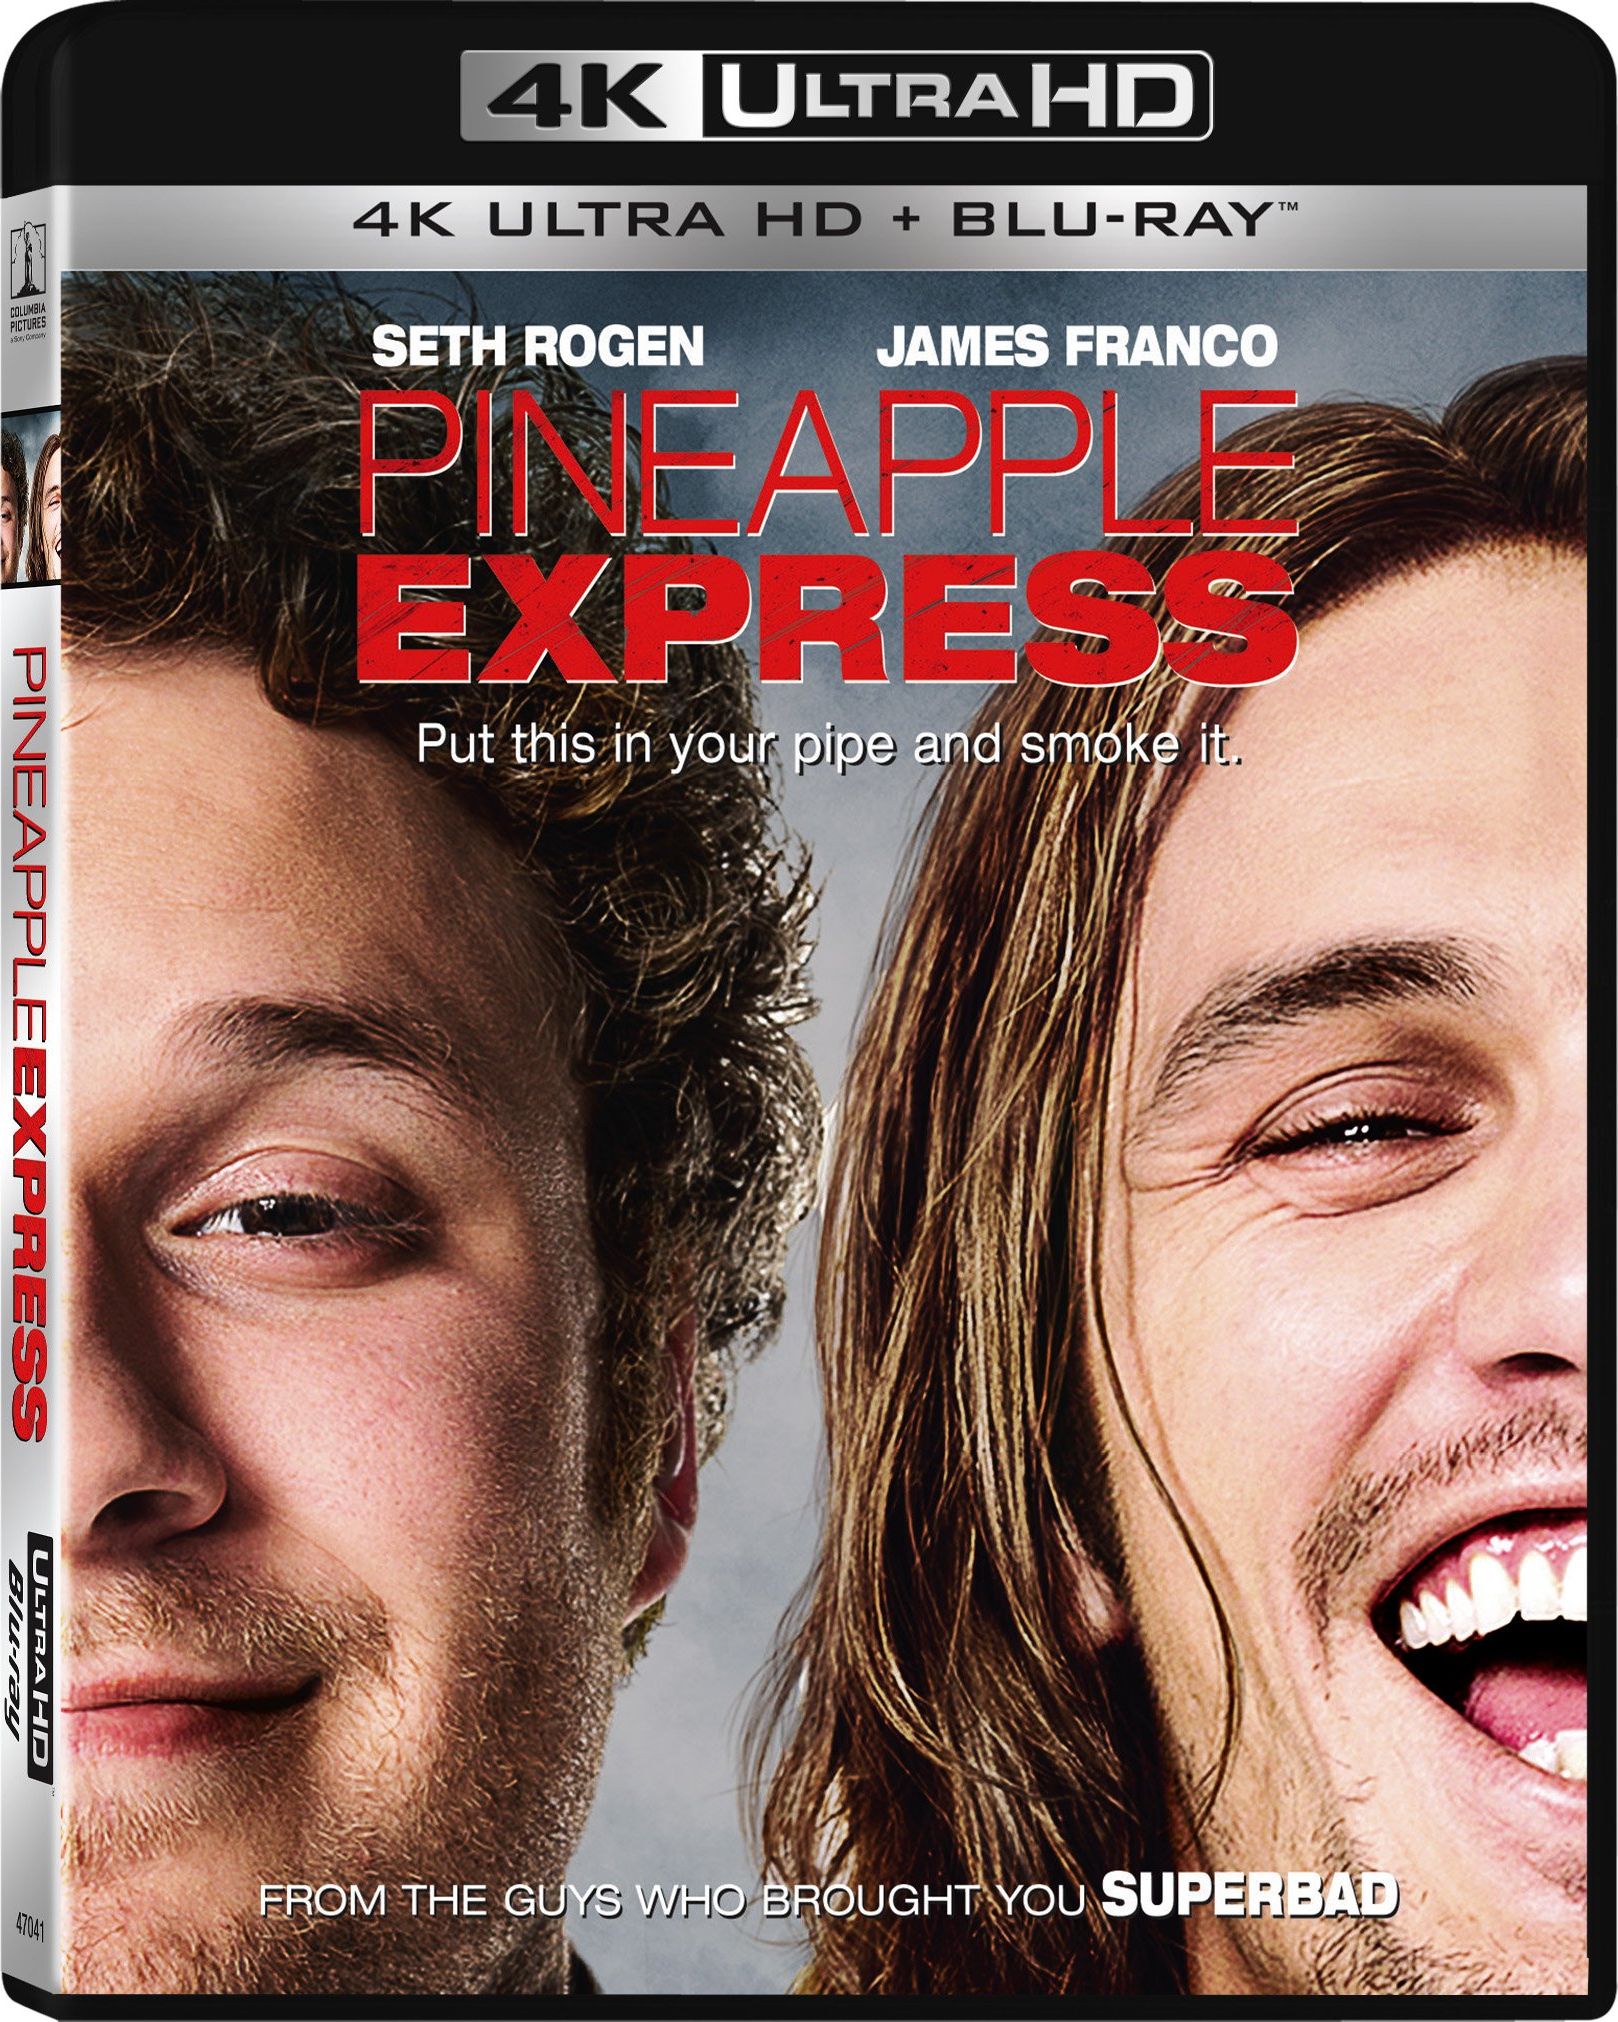 pineapple express blu-ray download torrent